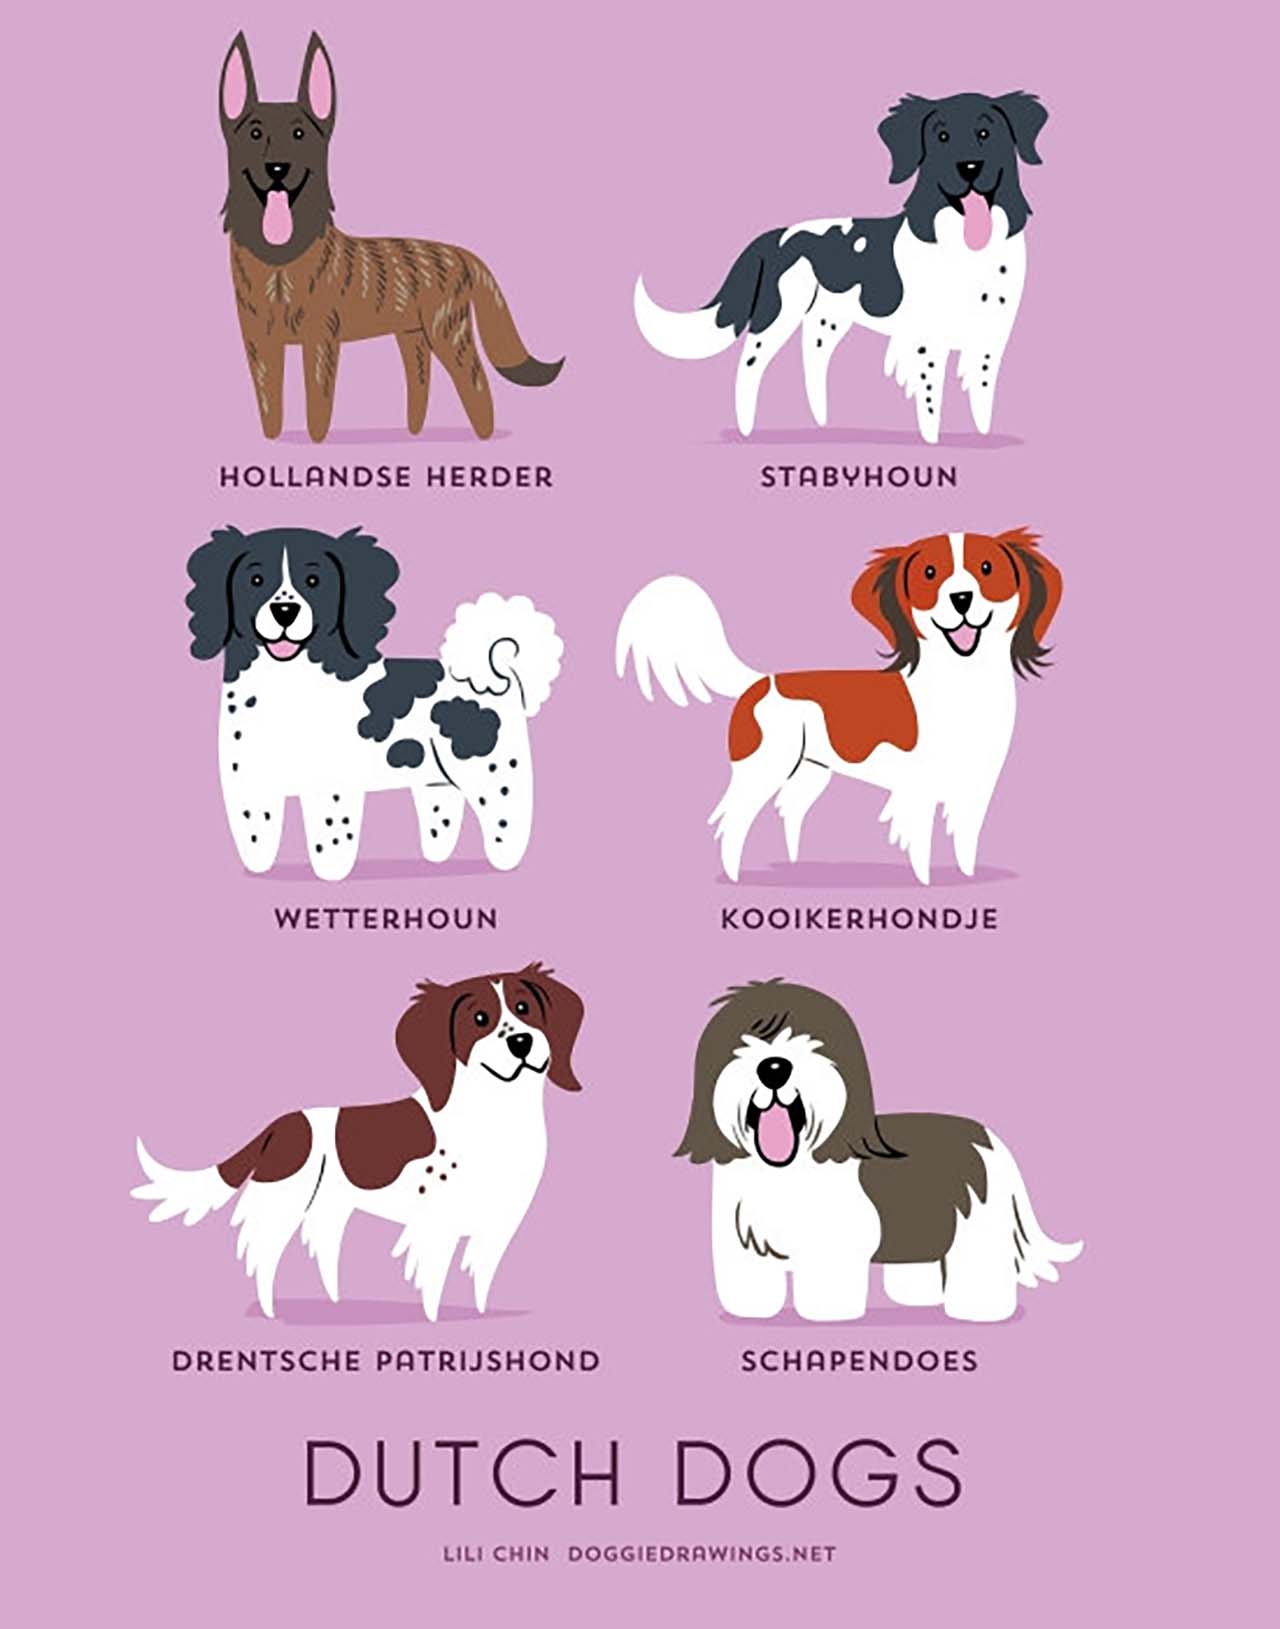 Origin Of Dogs: Cute Illustration By Lili Chin Show Where Dog Breeds Originating From #11: Dutch Dogs